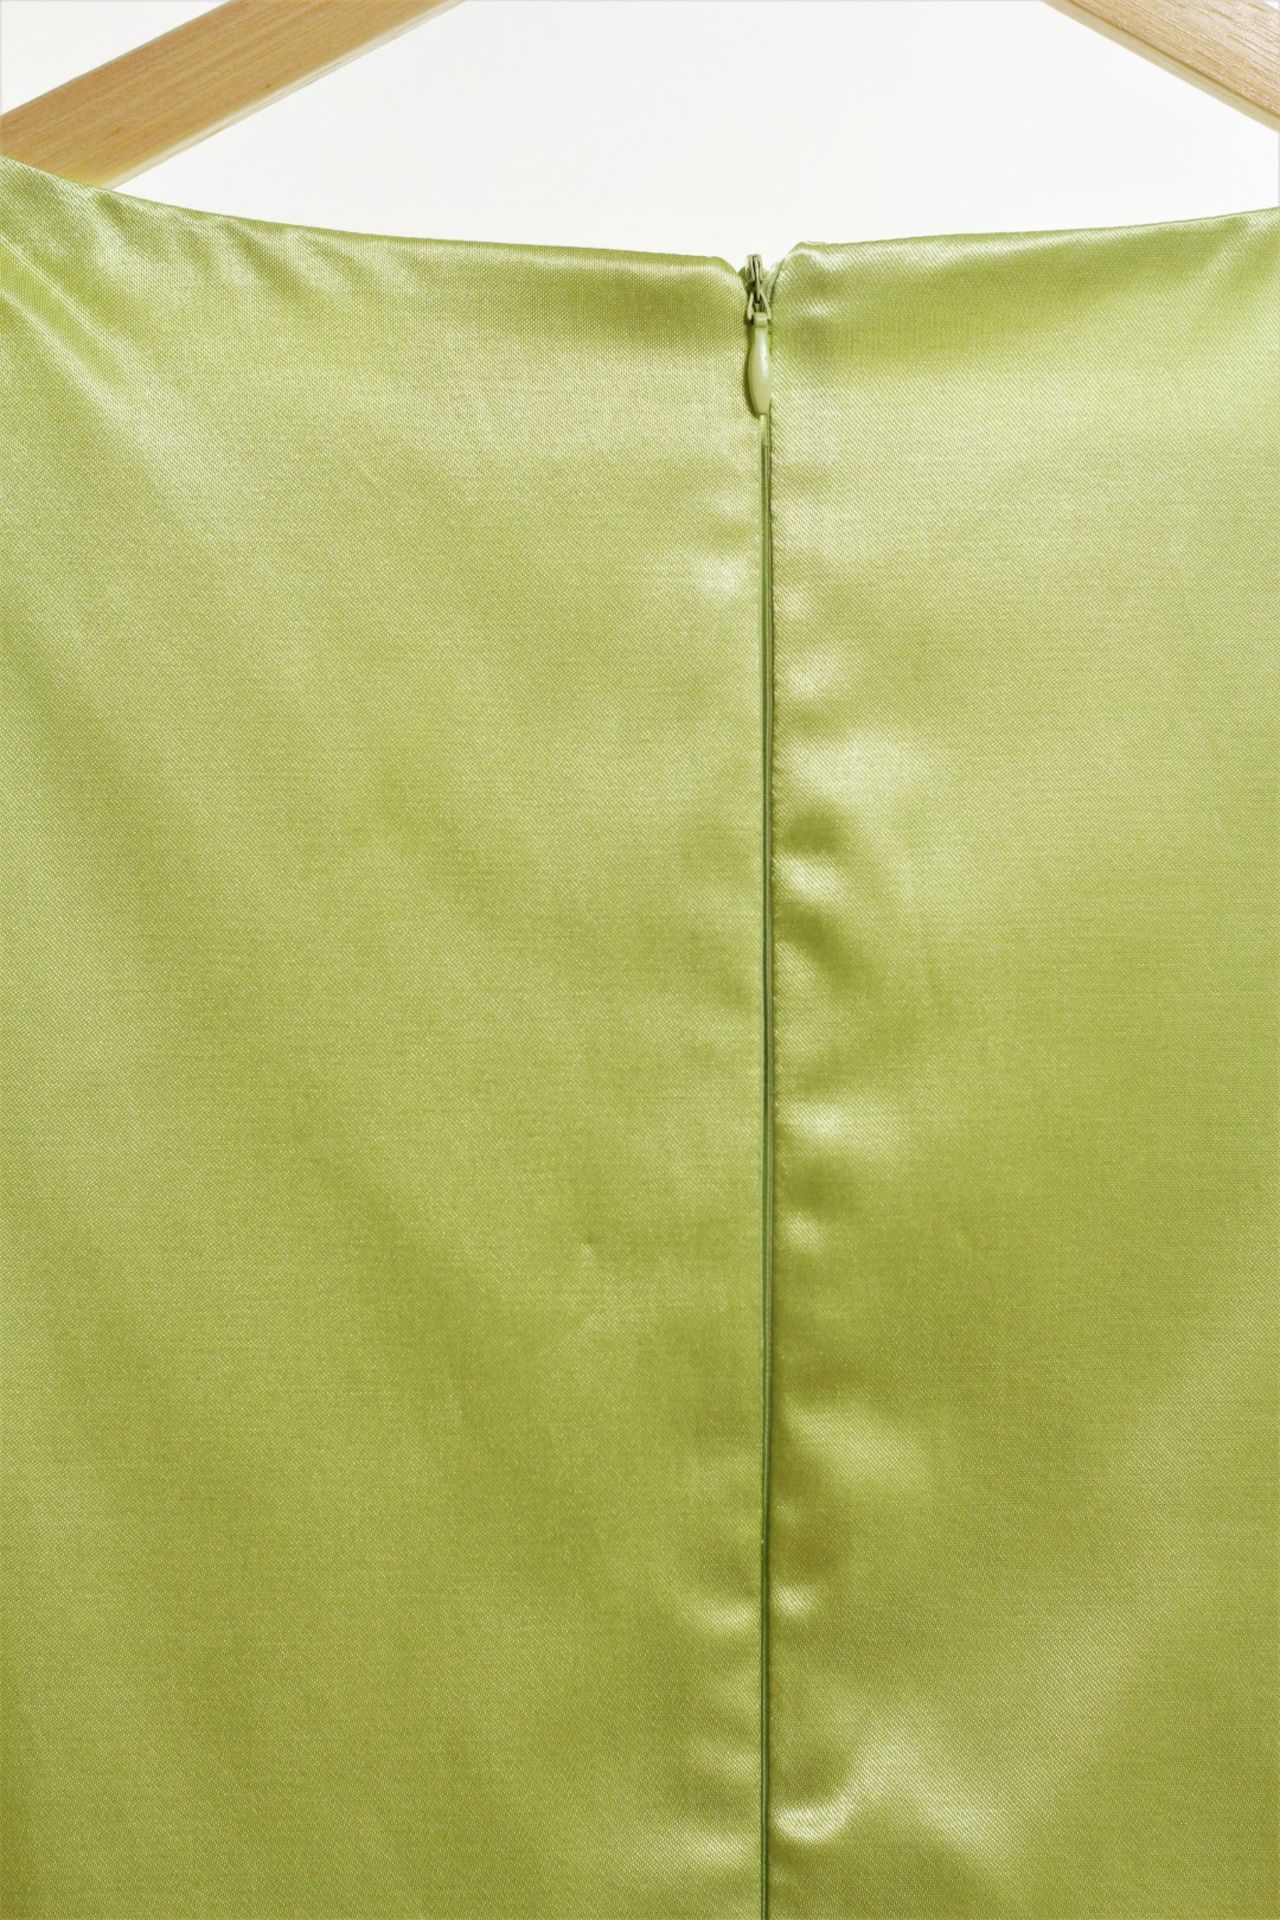 1 x Boutique Le Duc Lime Green Vest - From a High End Clothing Boutique In The - Image 2 of 9